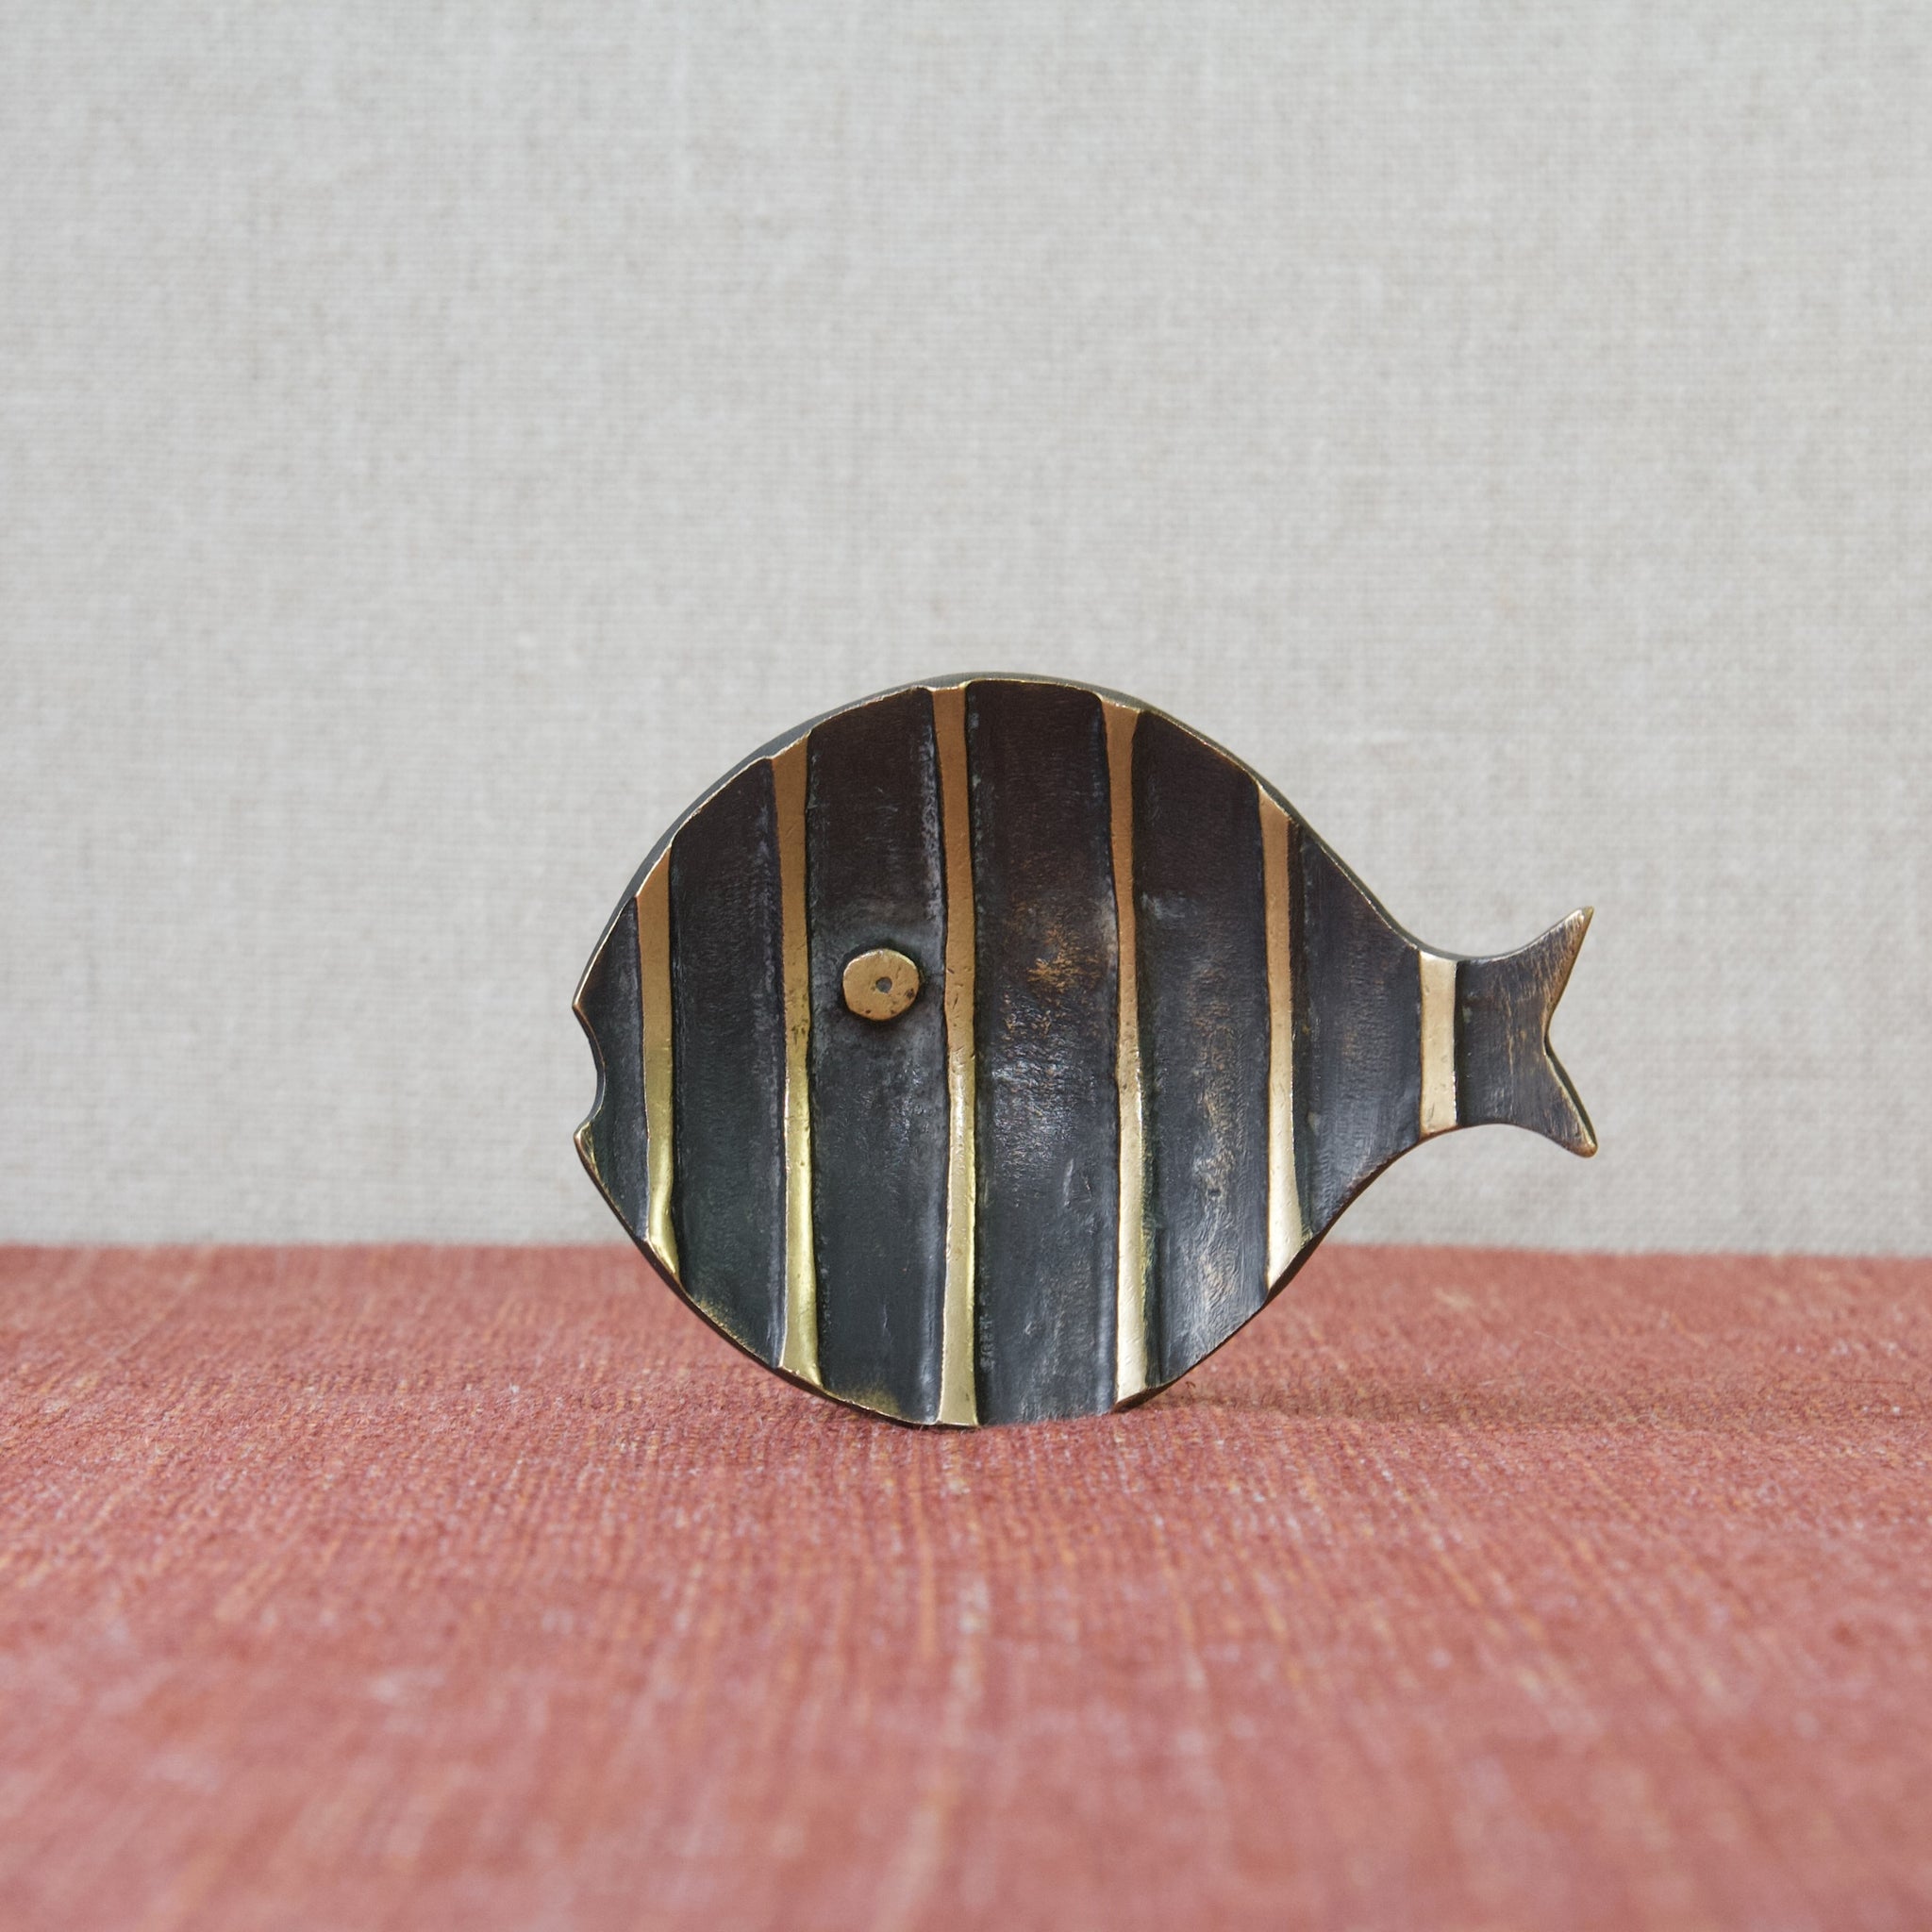 Profile image of a 'Black-Gold' Line Stripe Fish Tray by Walter Bosse for Herta Baller, Austria.